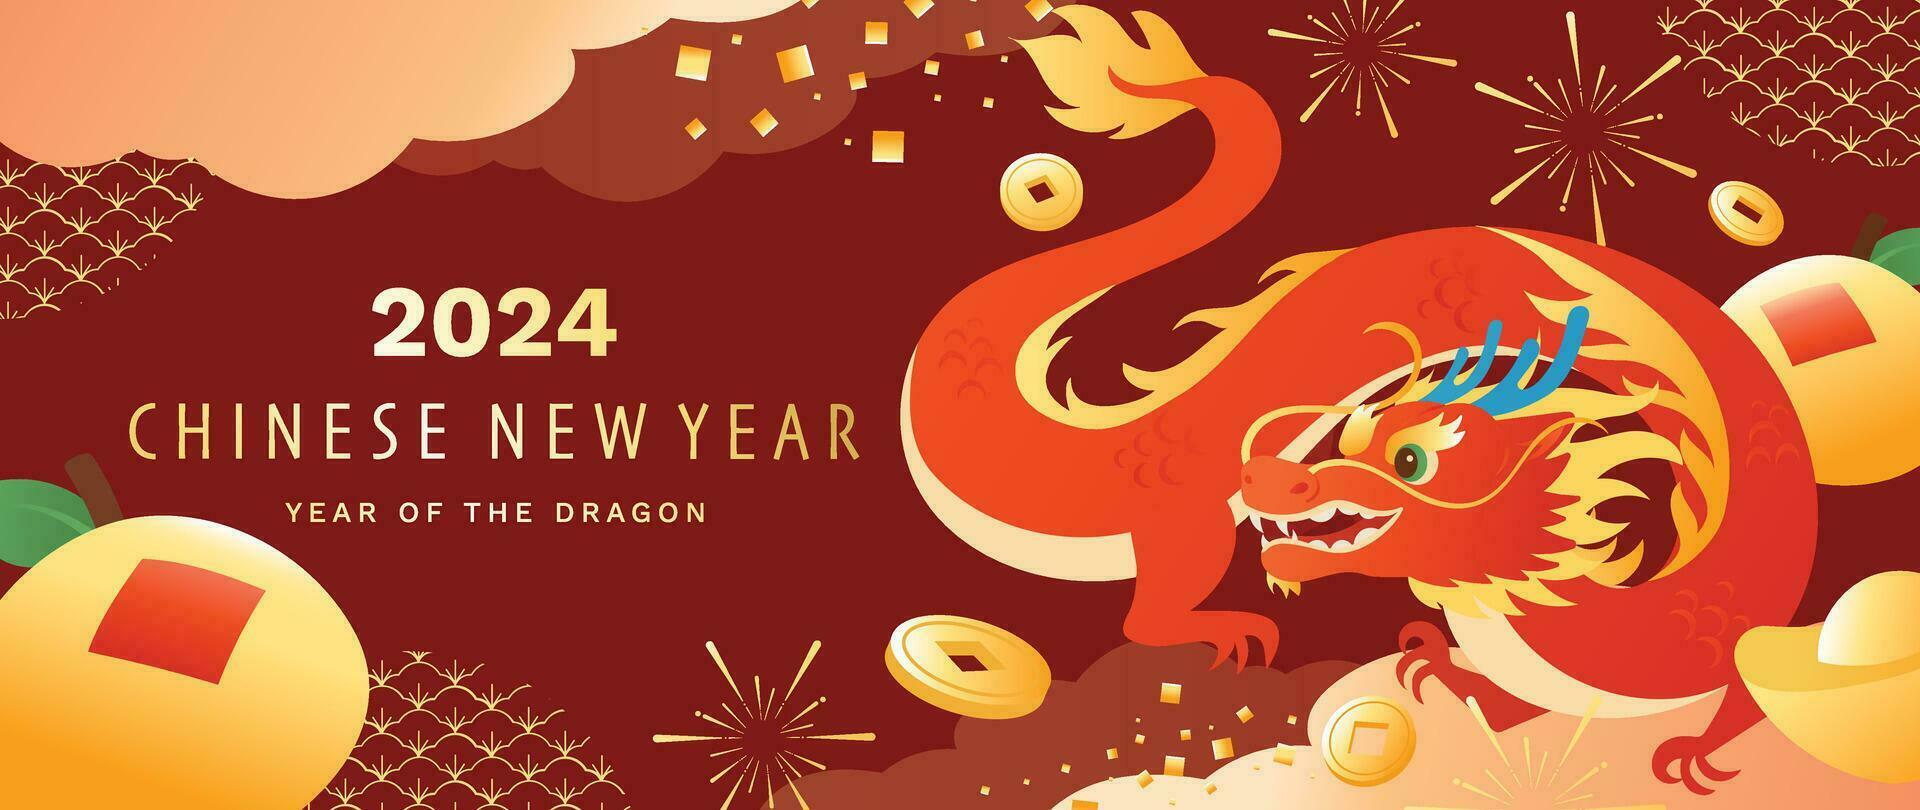 Happy Chinese new year background vector. Year of the dragon design wallpaper with dragon, orange, coin, firework, pattern. Modern luxury oriental illustration for cover, banner, website, decor. vector